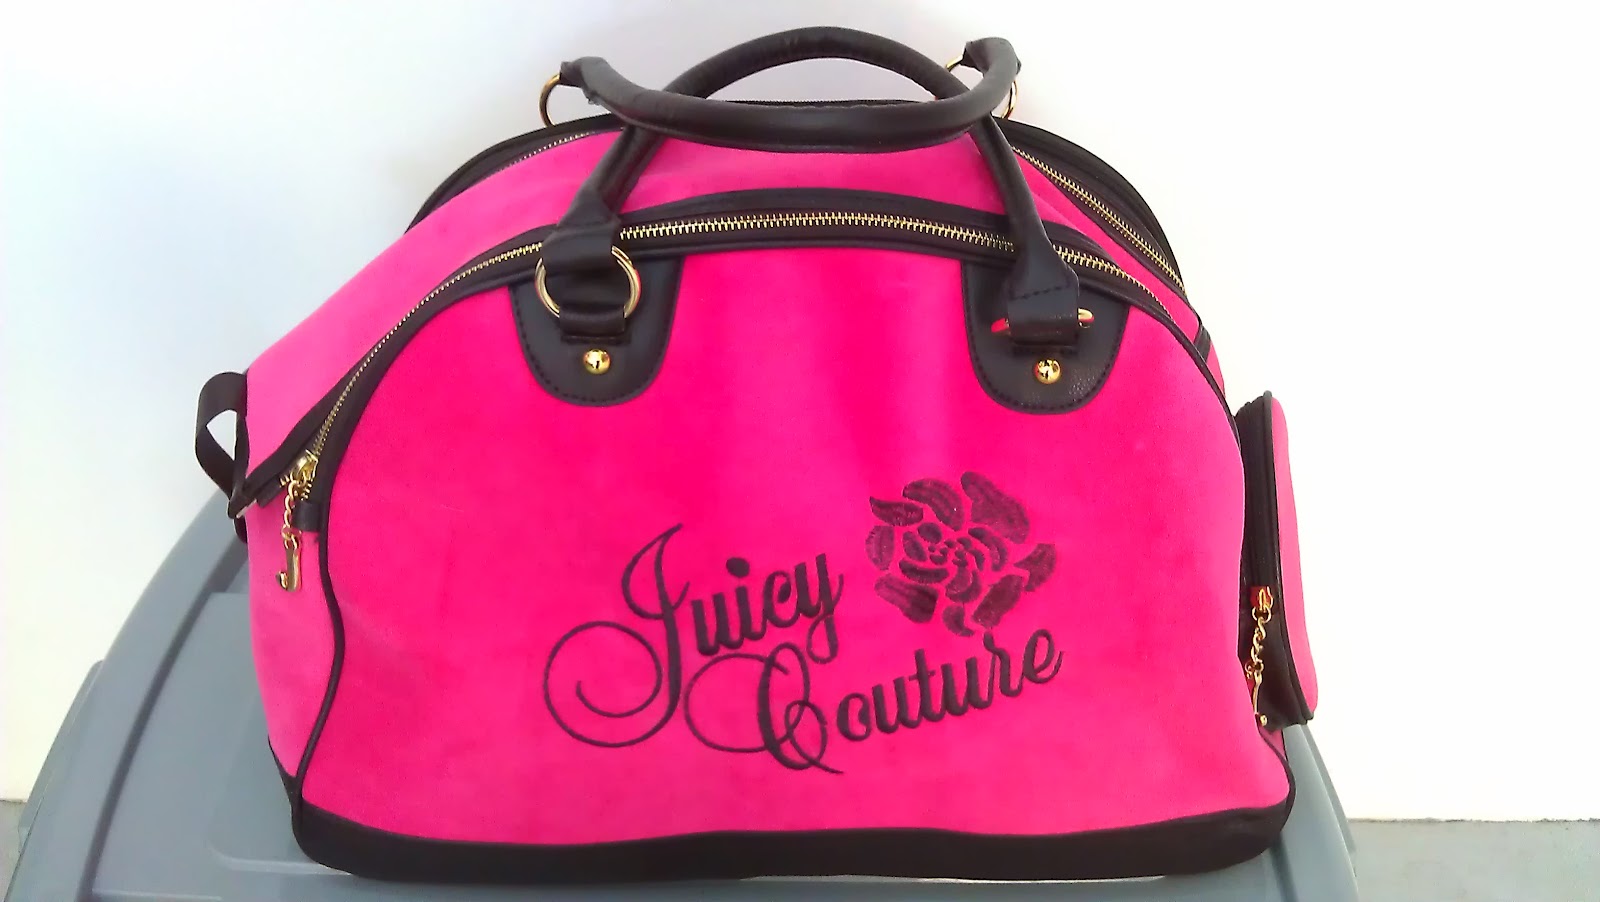 All Brand Handbags Juicy Couture Travel Bag Good Quality